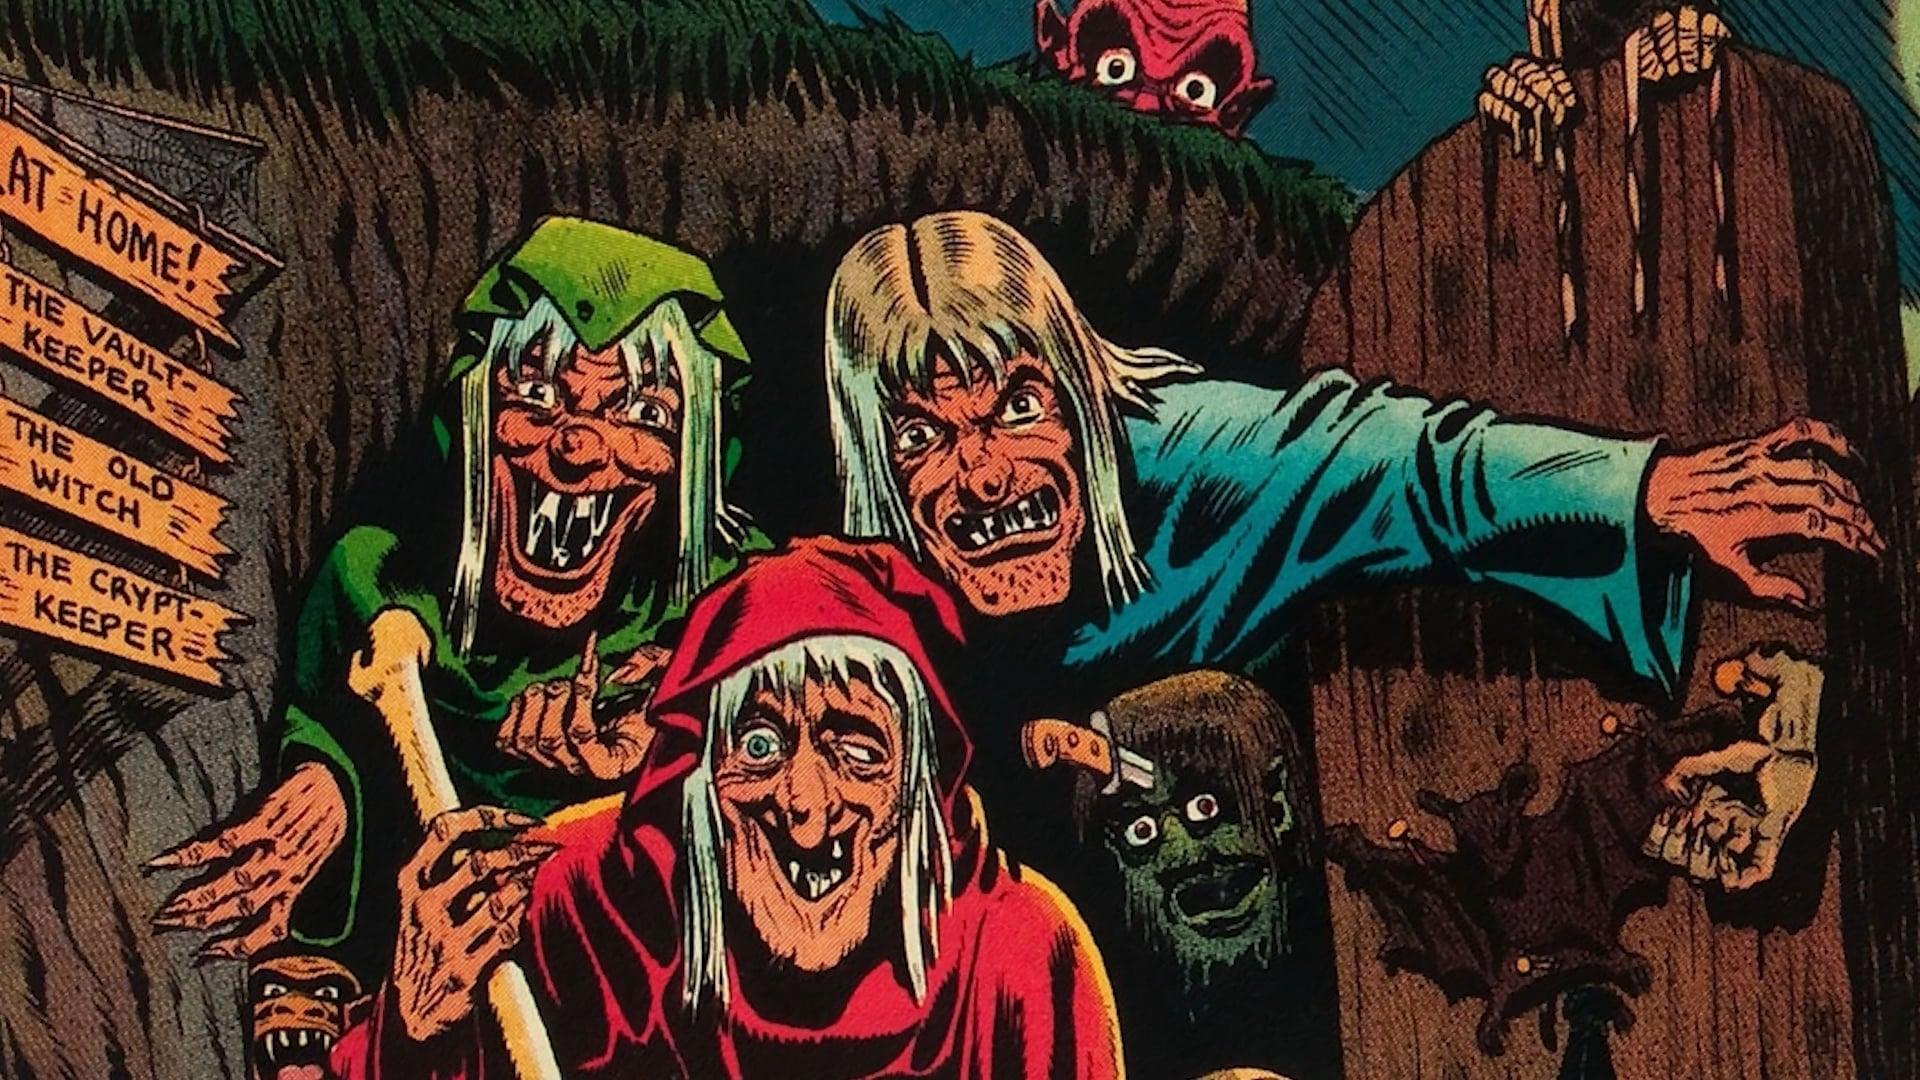 Just Desserts: The Making of 'Creepshow' backdrop